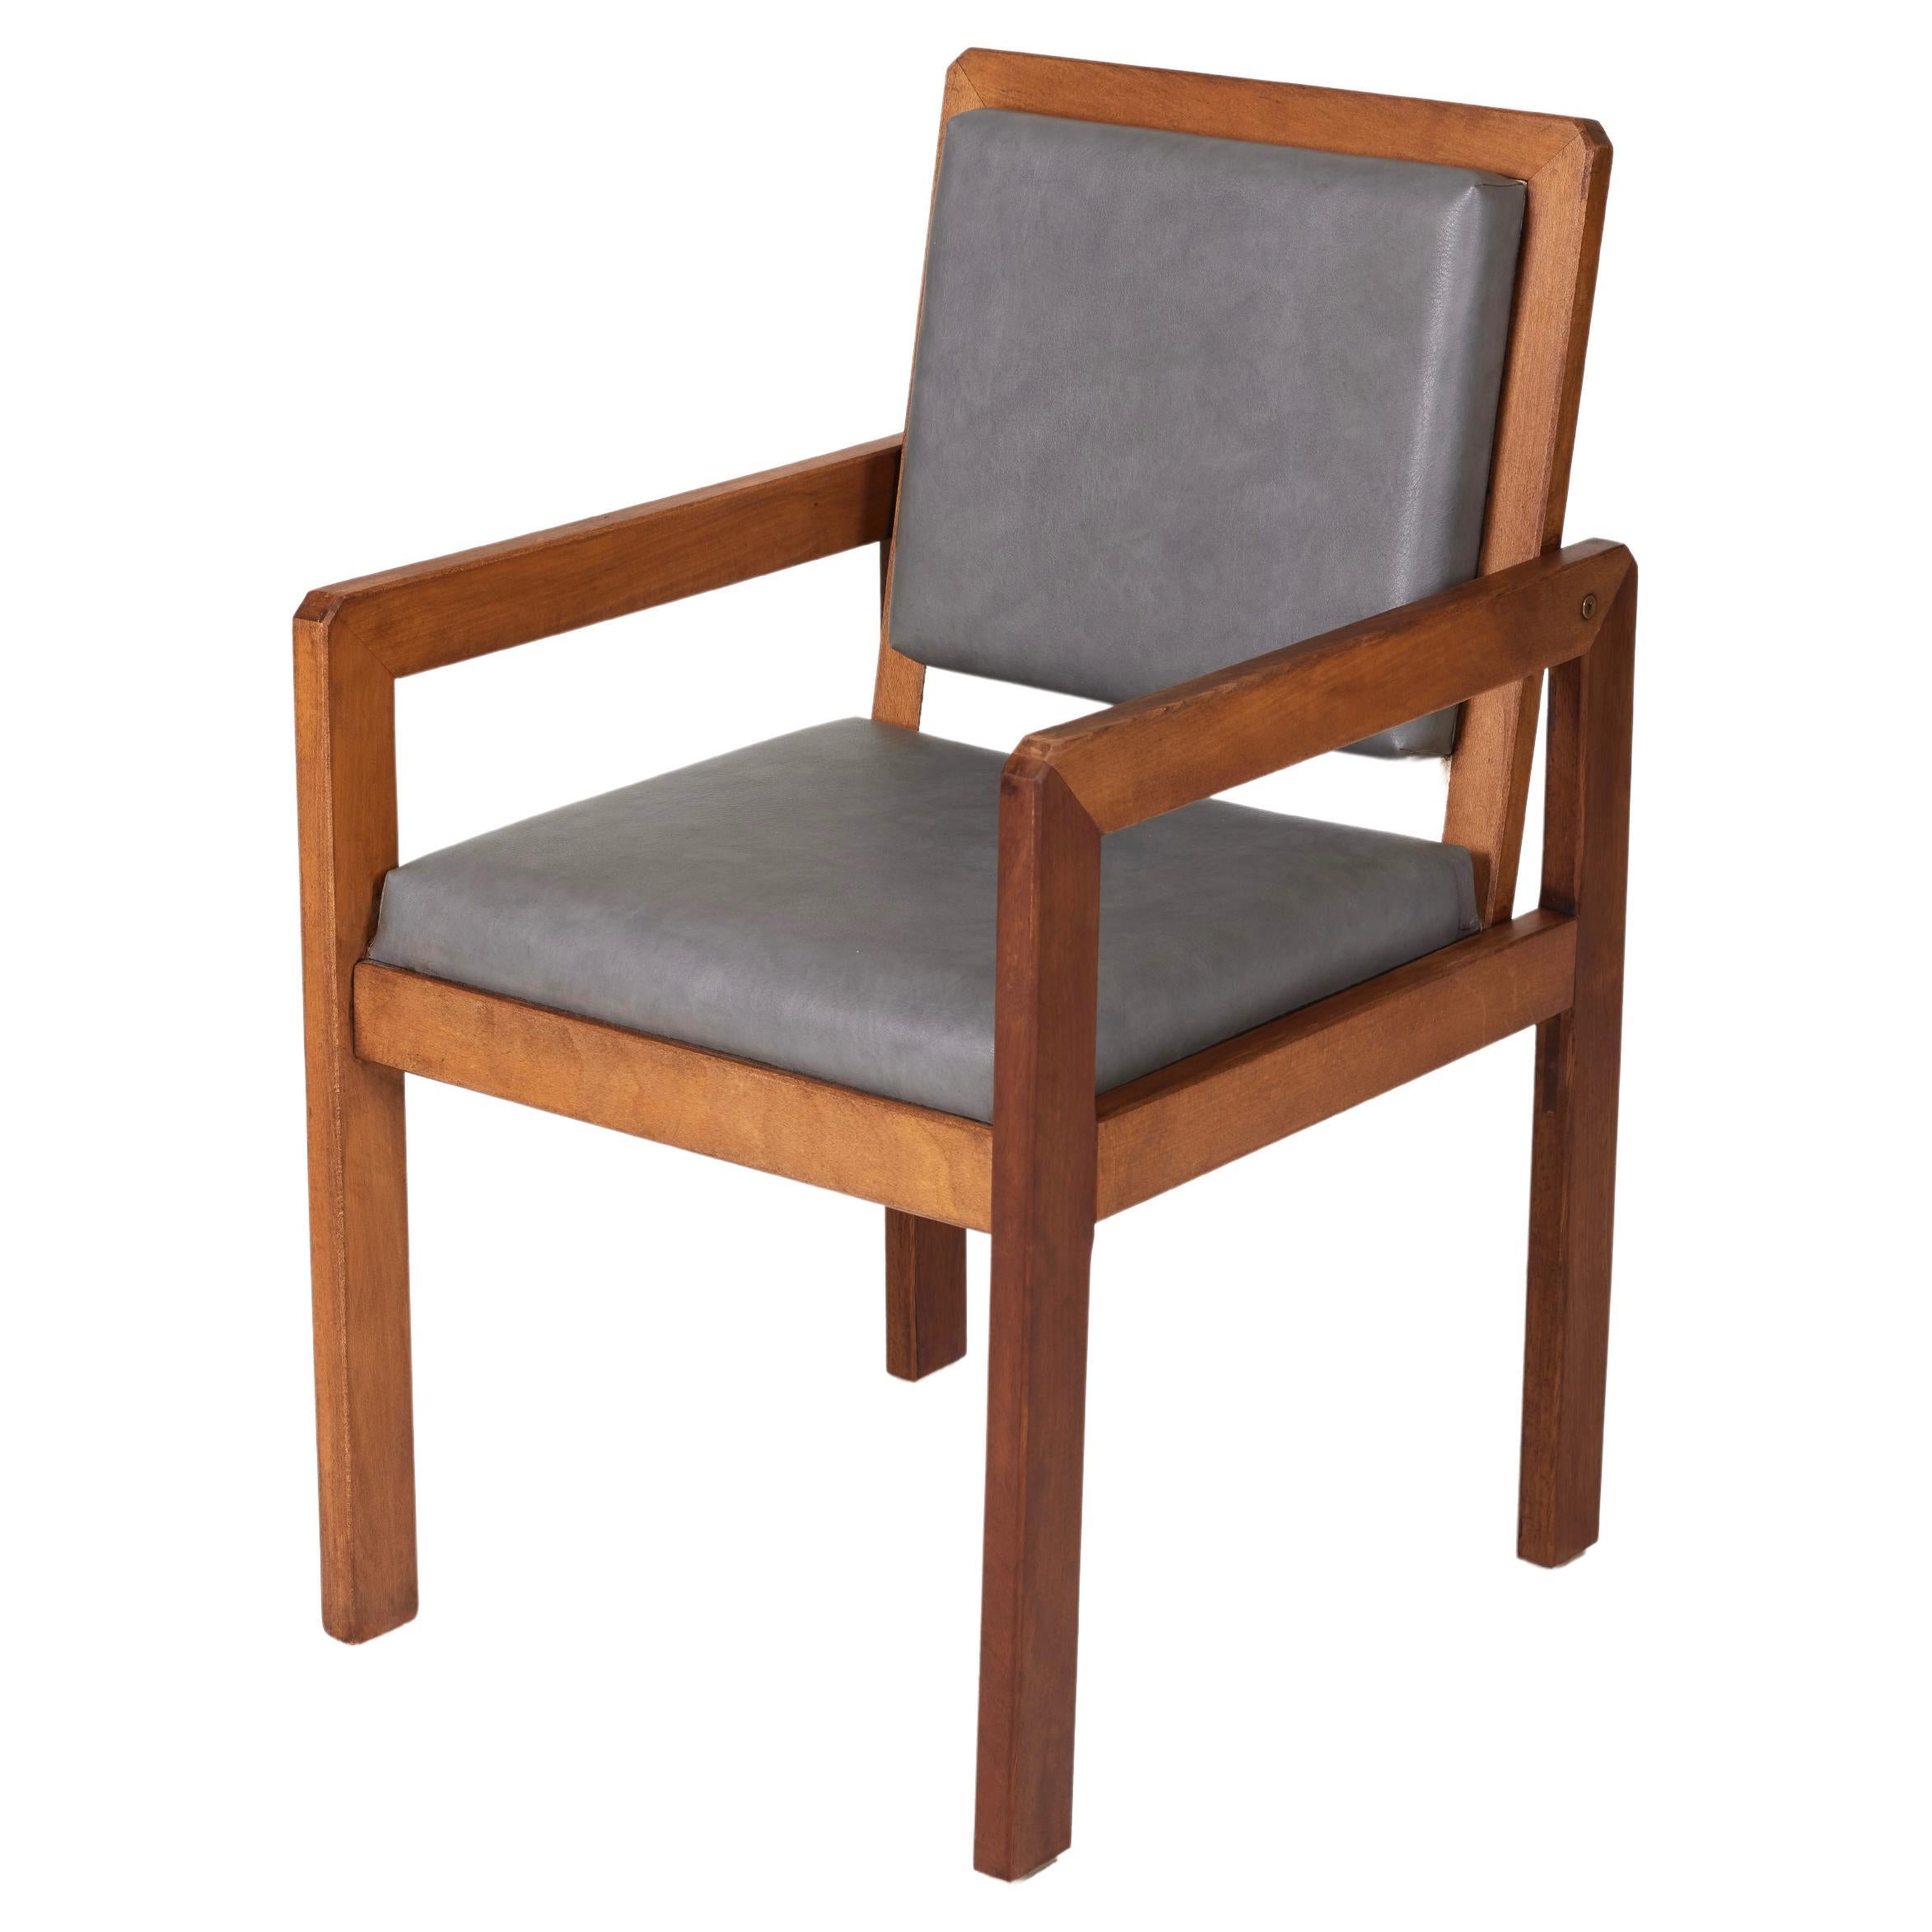 Wood and leather armchair by the french designer André Sornay